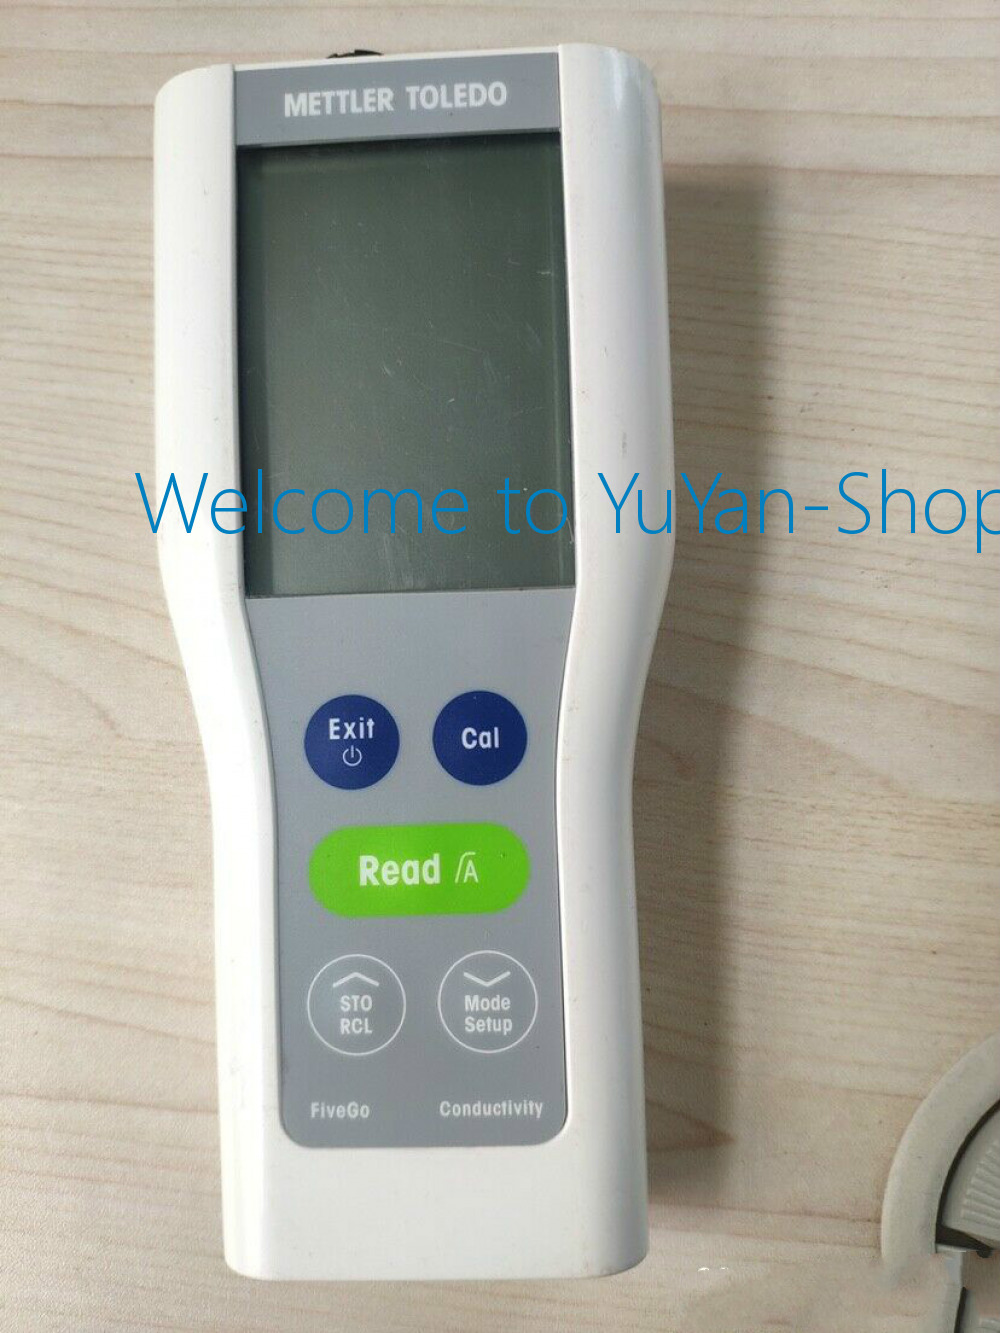 1pc Used Fivego Conductivity Meter F3-fivego Portable #rj8 Df